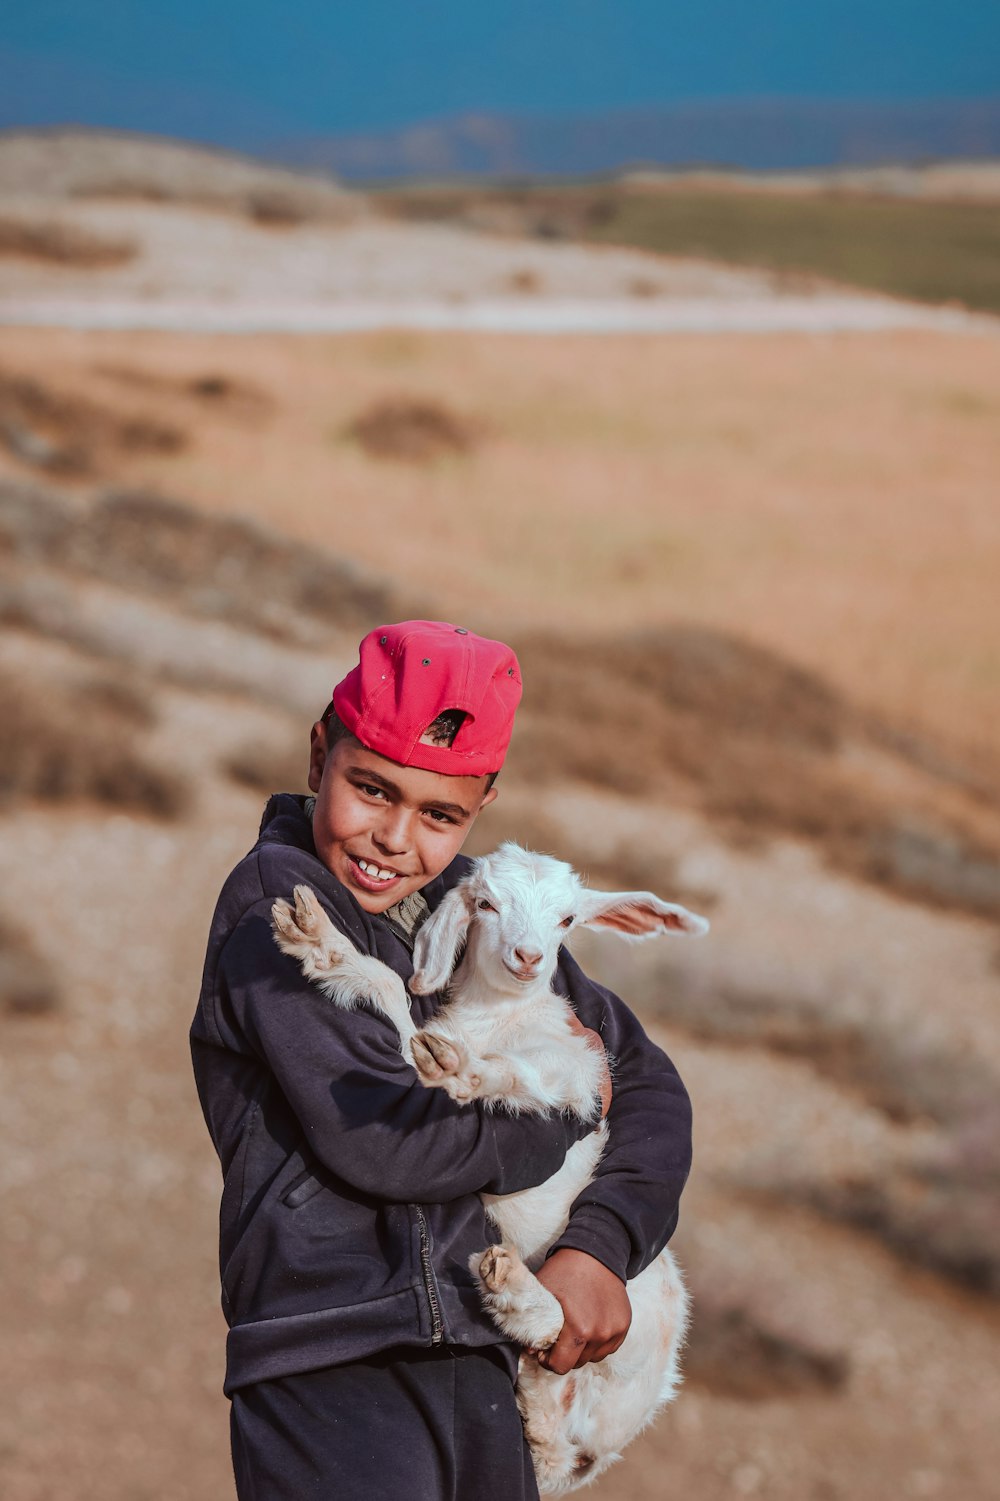 a young boy holding a baby goat in his arms